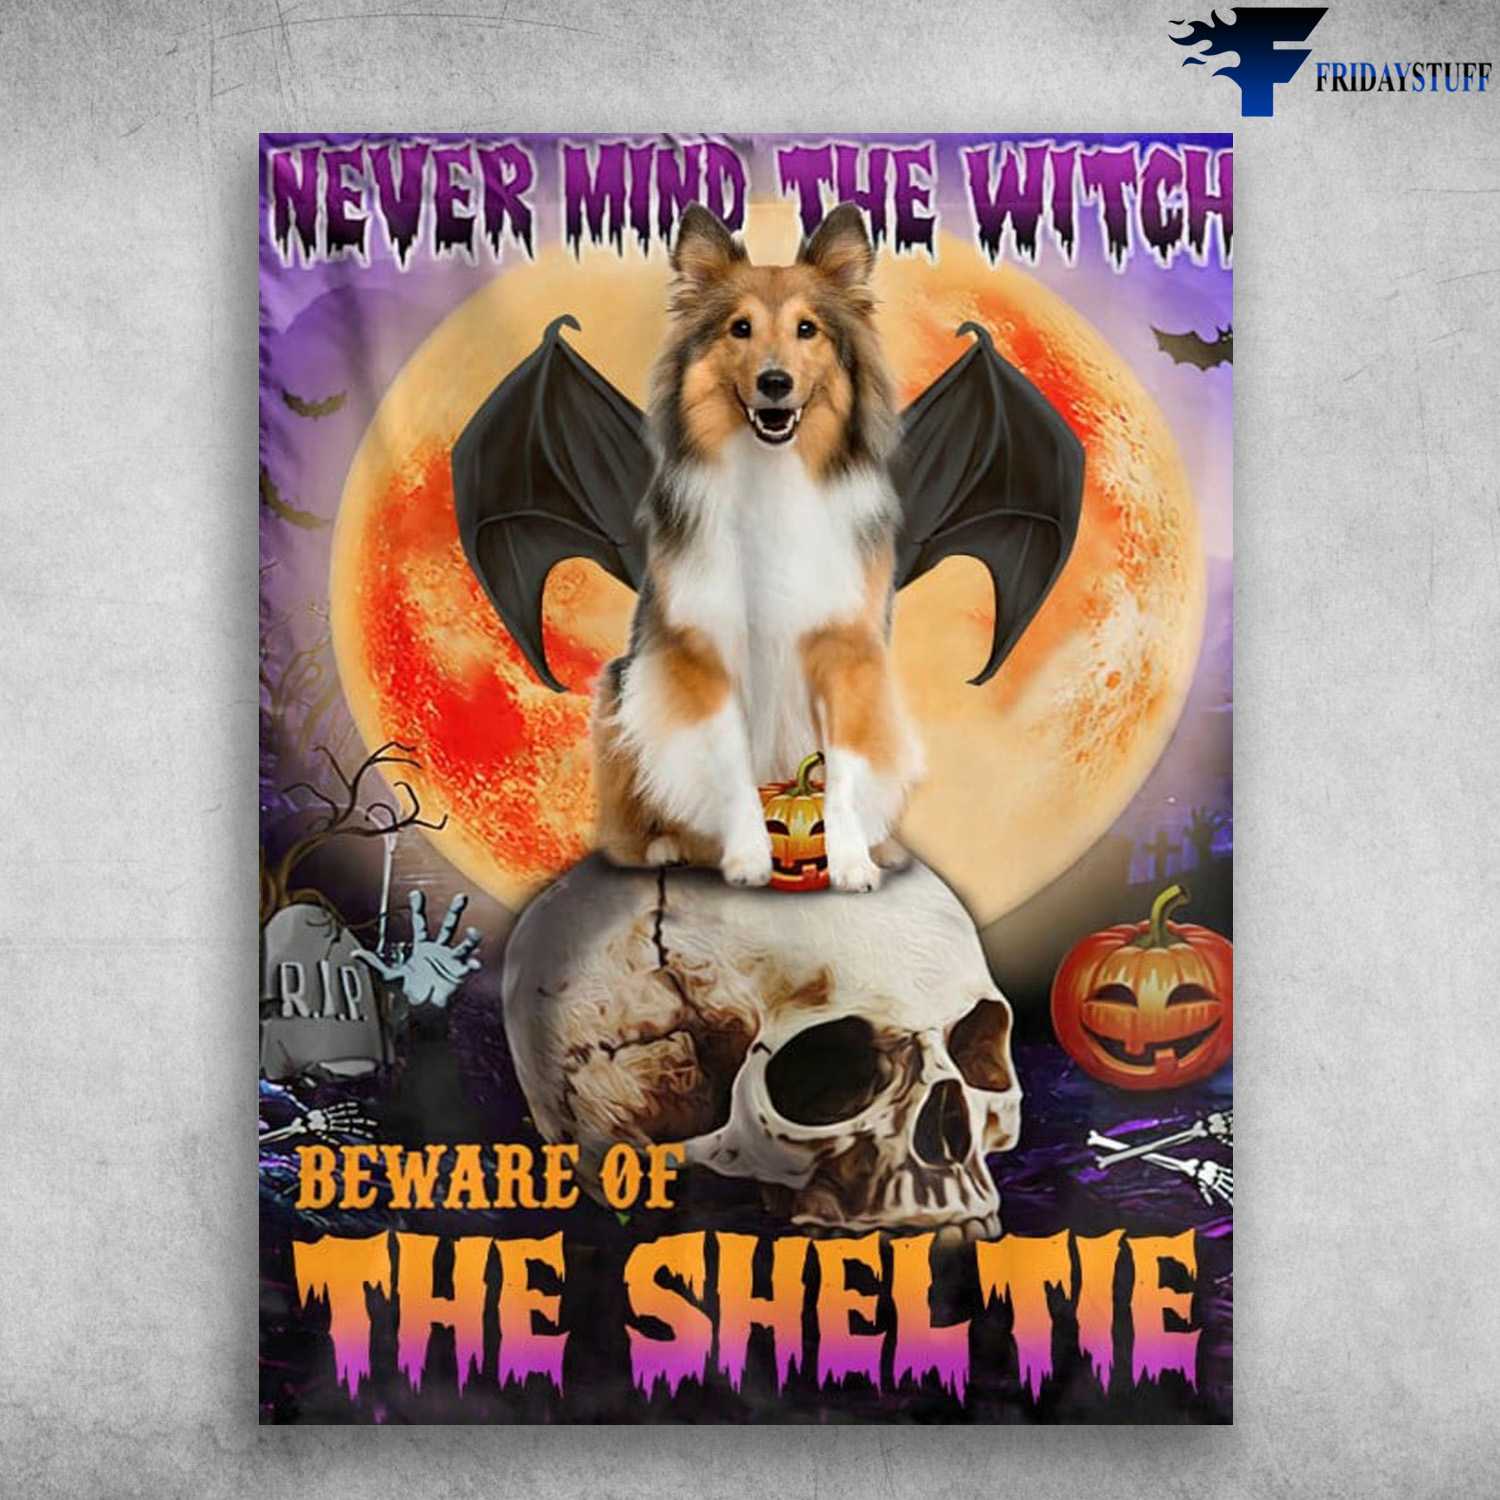 Shetland Sheepdog, Halloween Poster - Nevermind The Witch, Beware Of The Sheltie